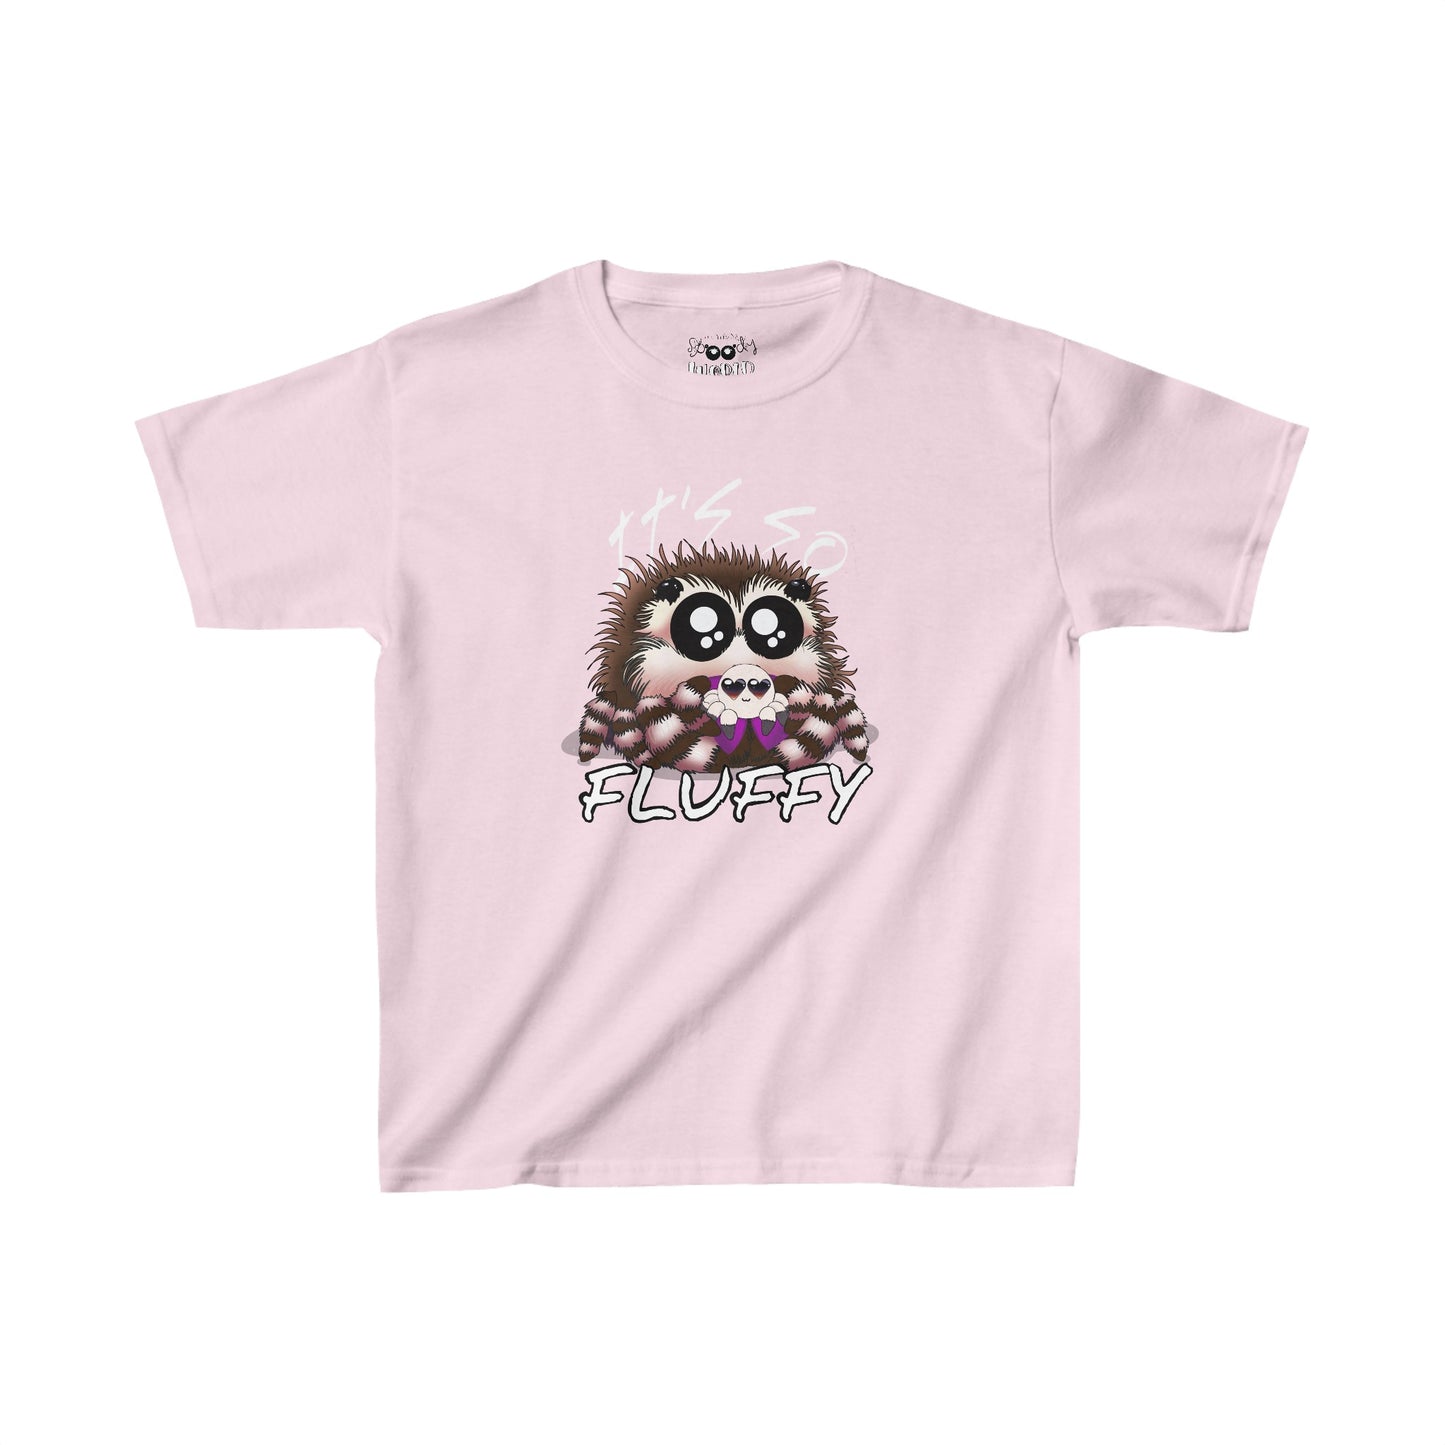 Kids Its So Fluffy! Jumping Spider Tee